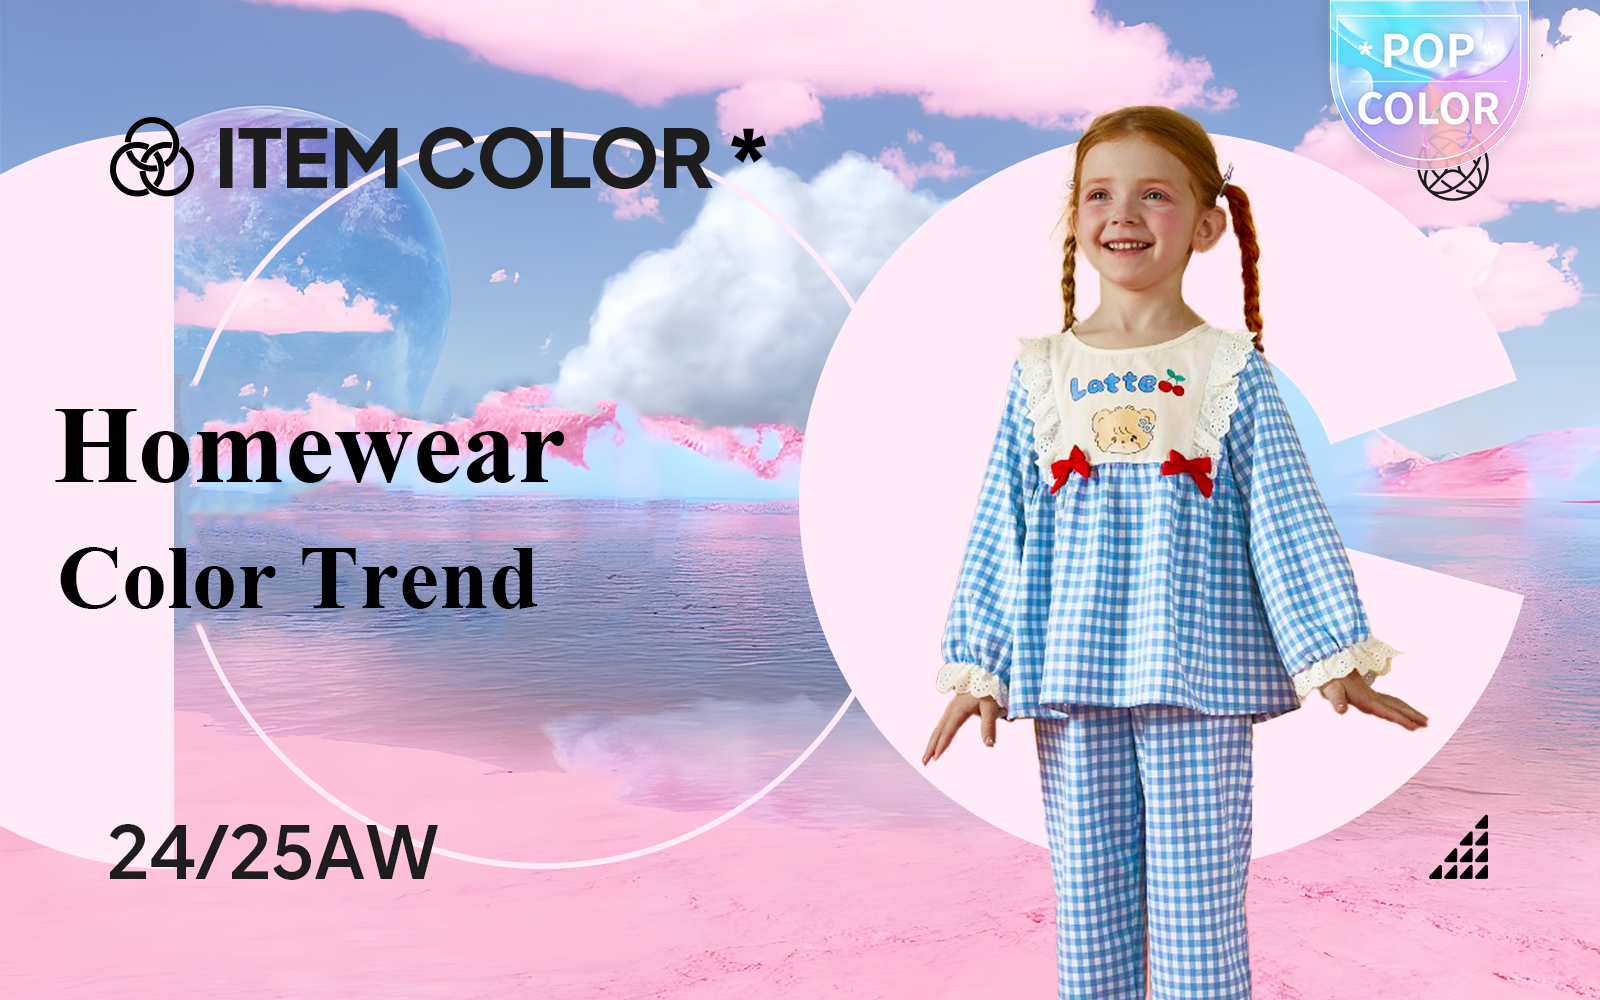 The Color Trend for Girls' Homewear